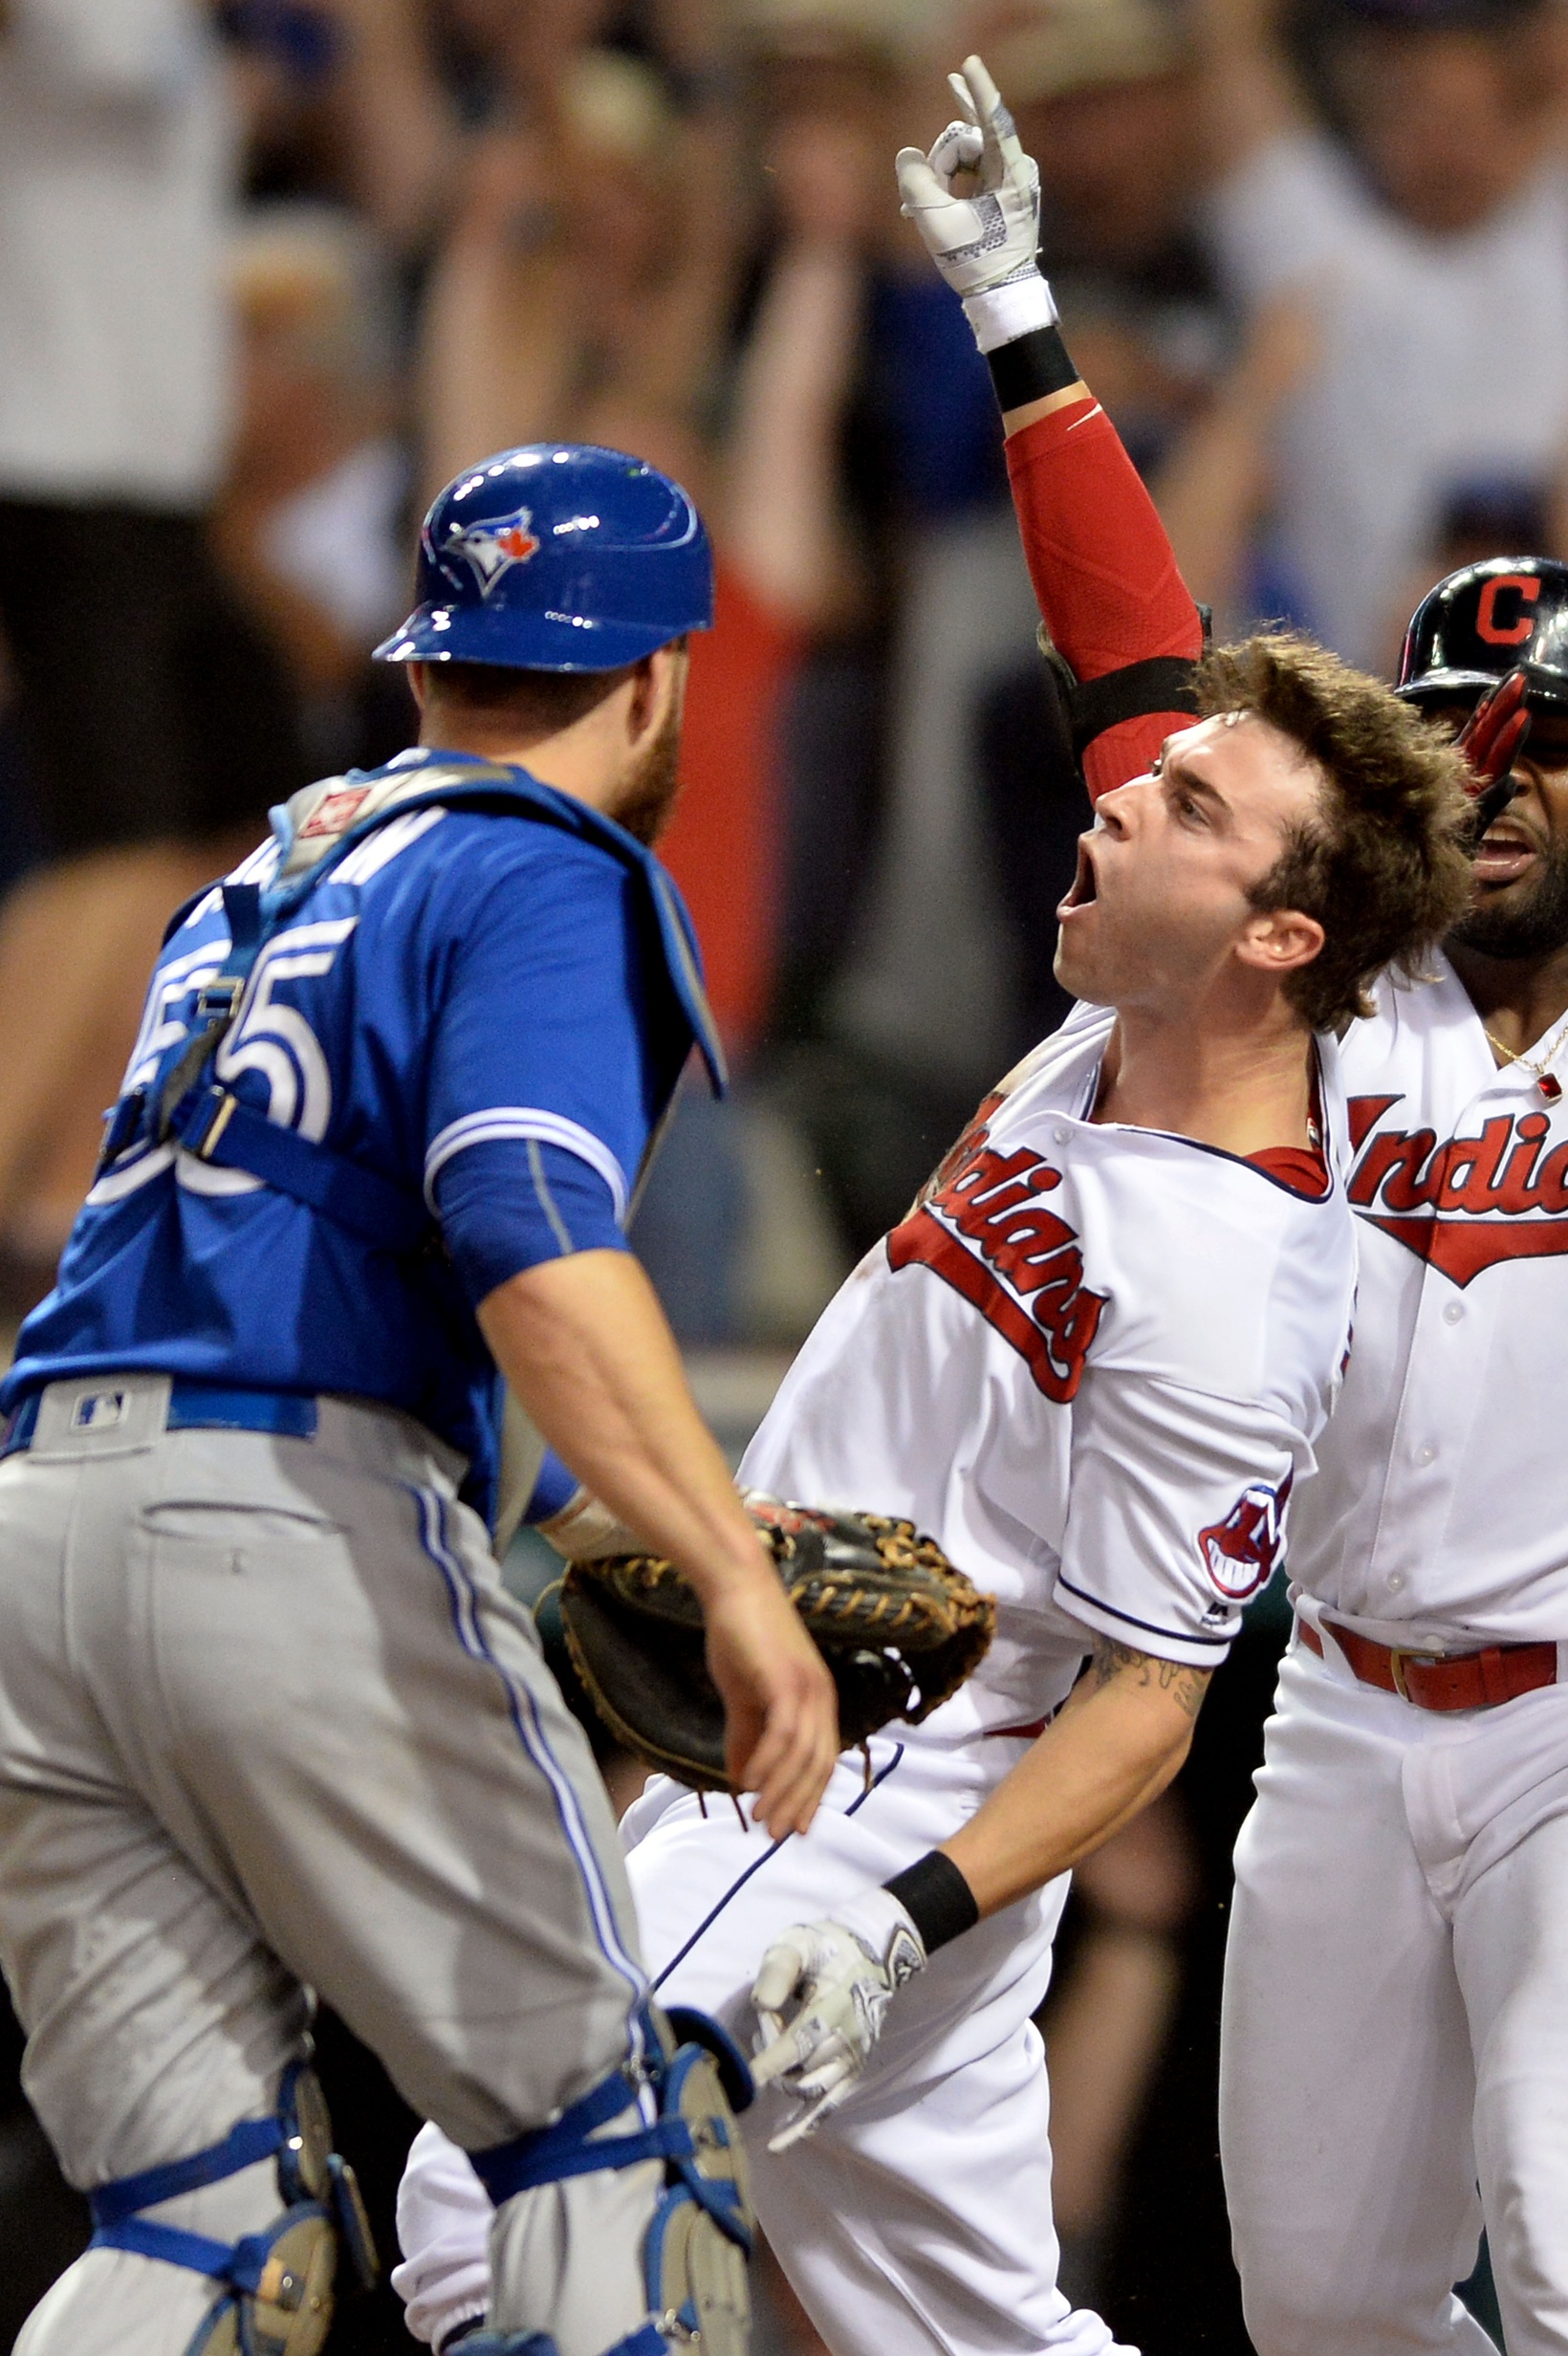 Cleveland Indians see improvement from Tyler Naquin